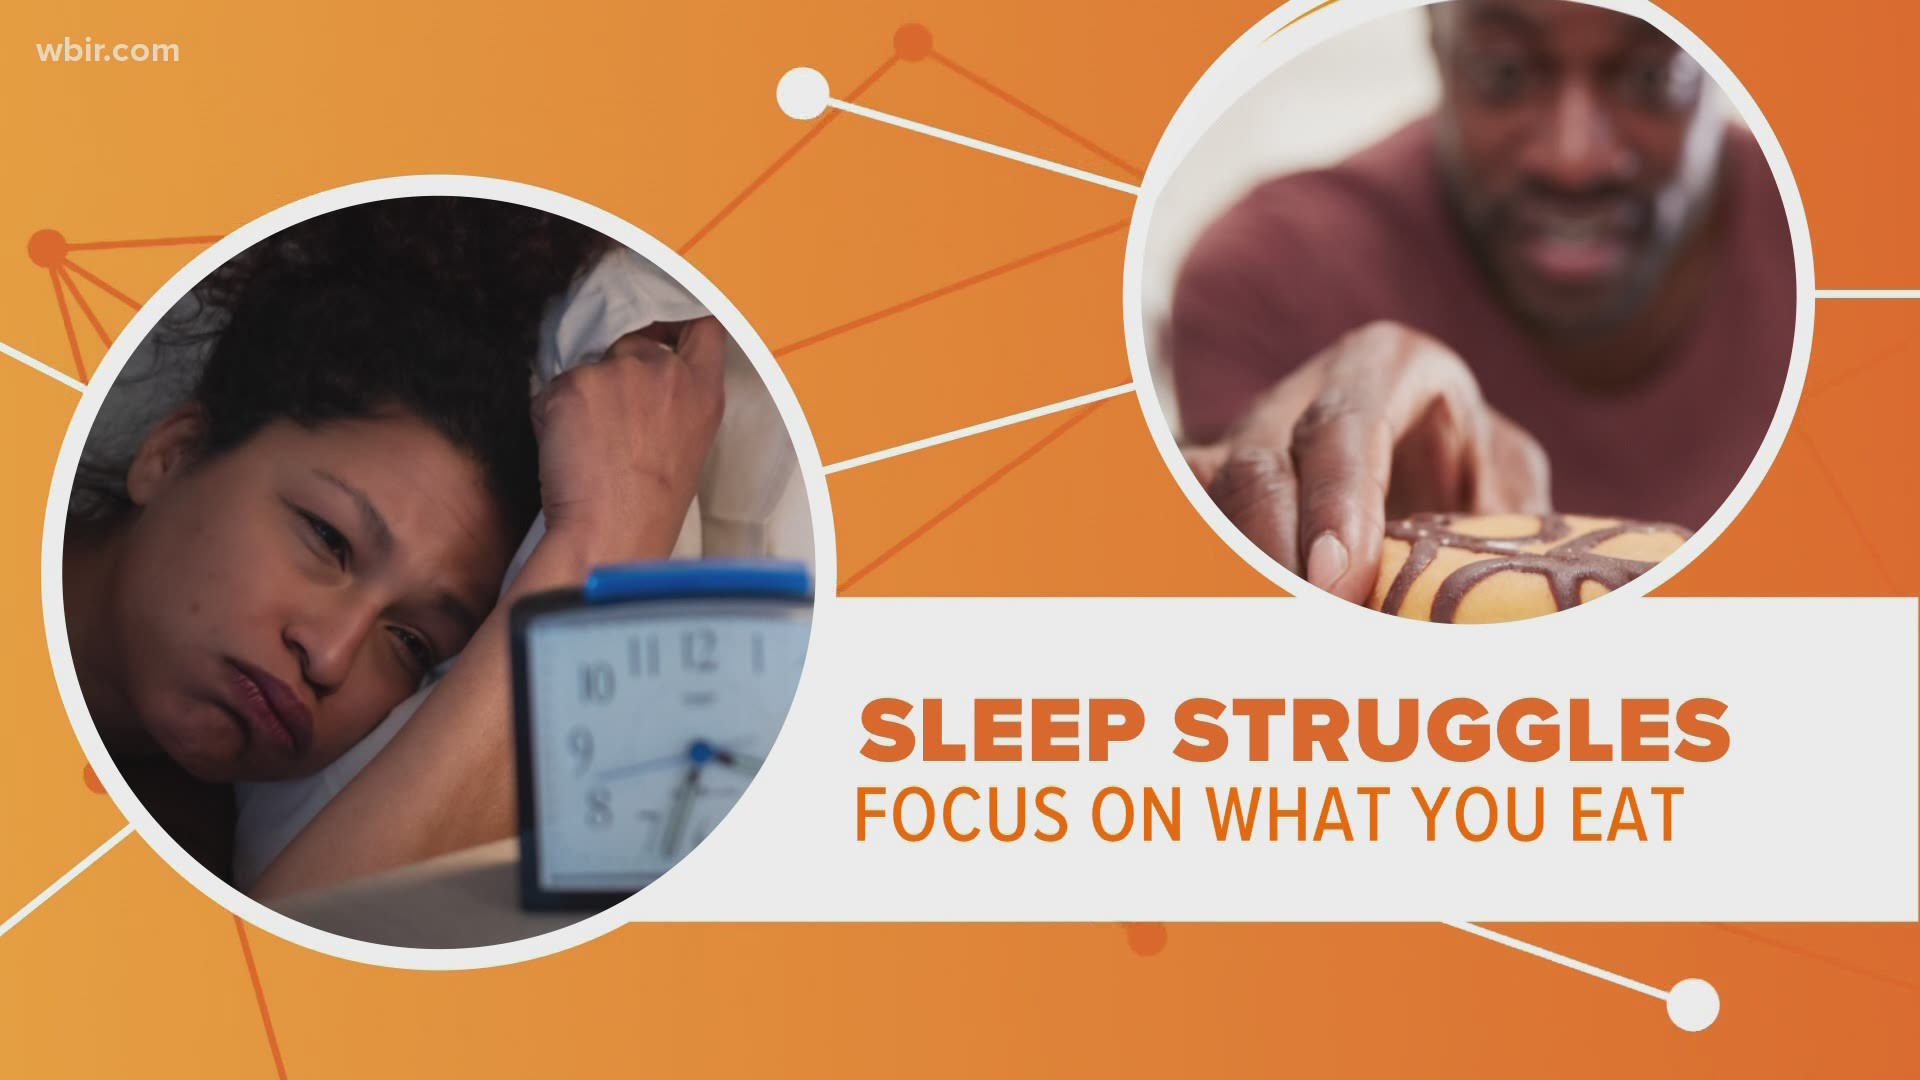 Are you struggling to get a good night's sleep? You may want to focus on what you eat.